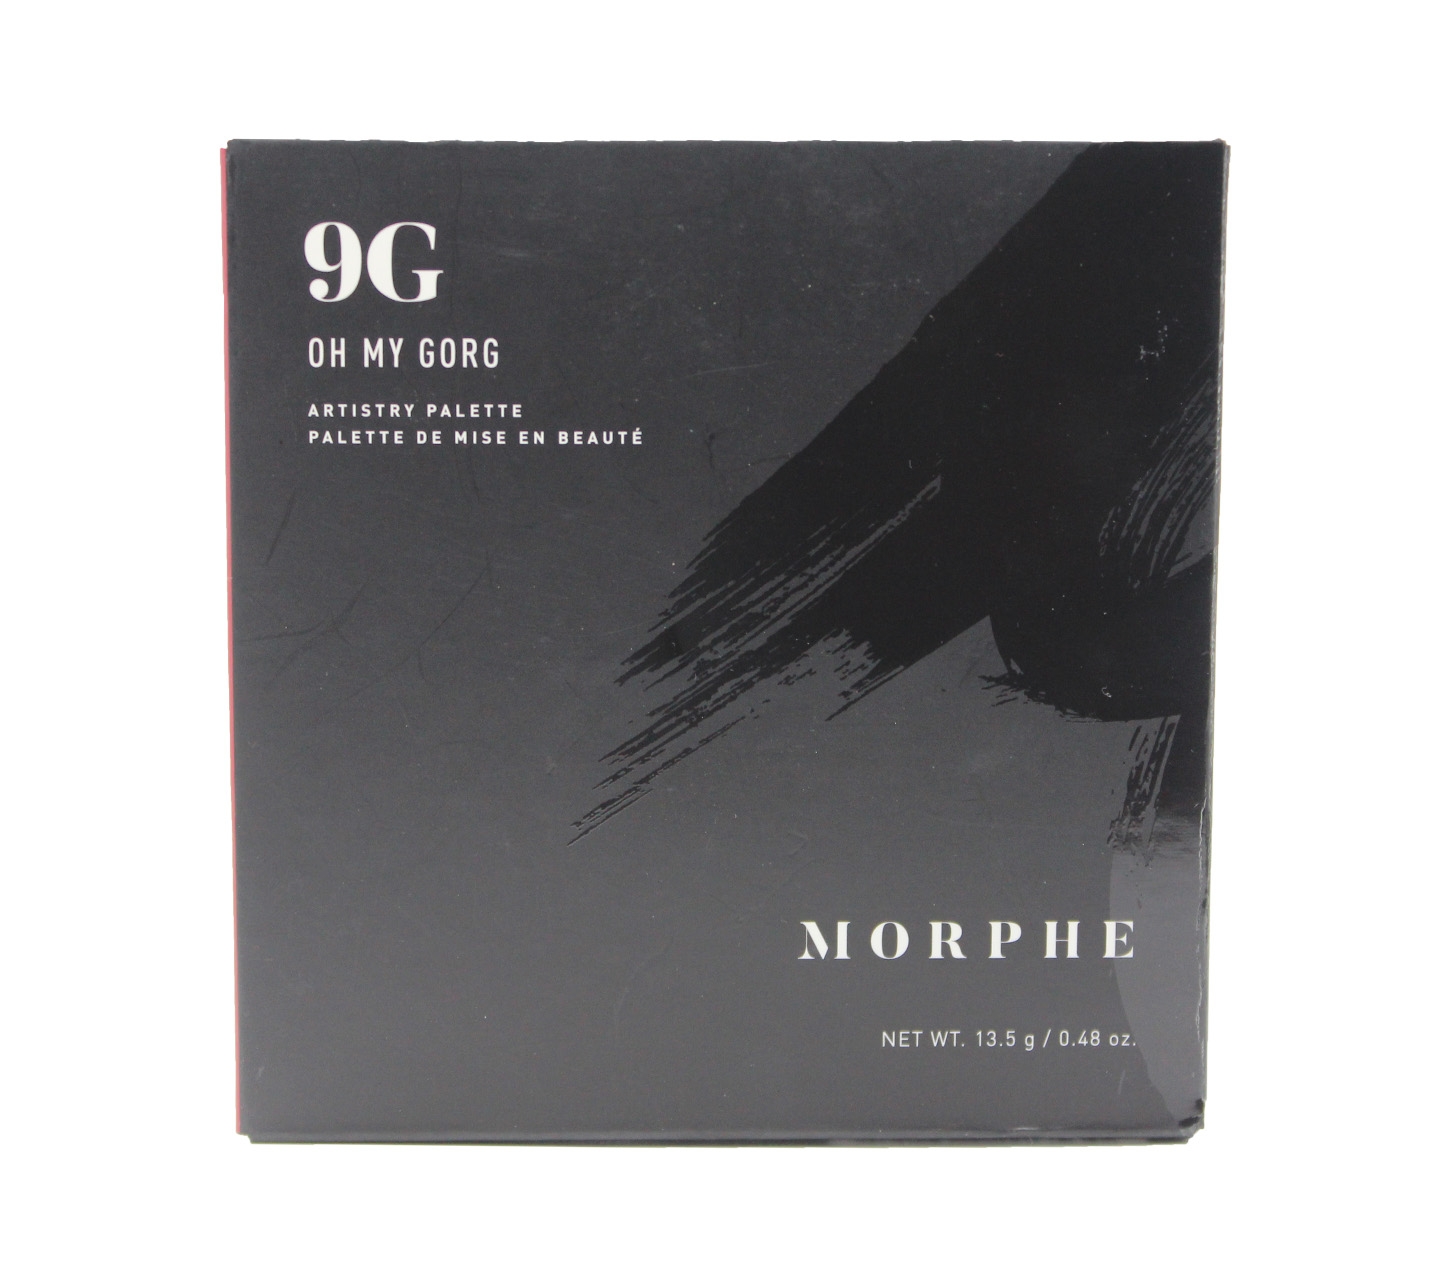 Morphe 9G Oh My Gorg Artistry Sets and Palette